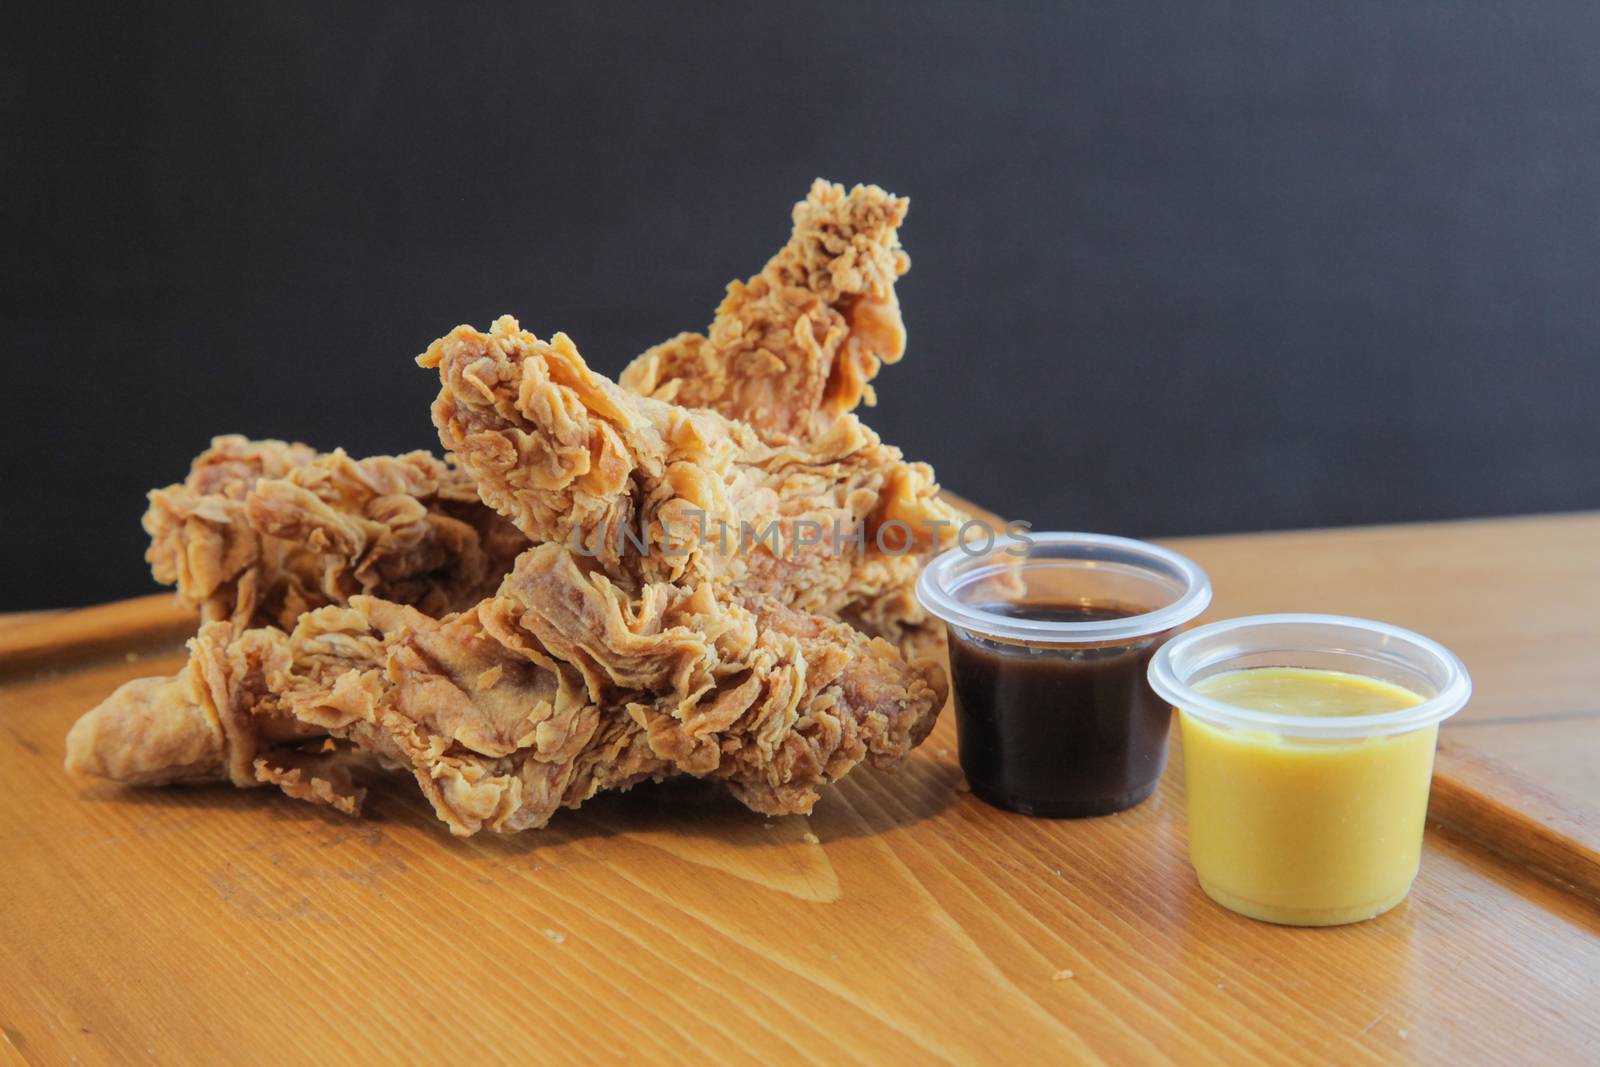 Fried Chicken Strips served with mustard and bbq sauce

